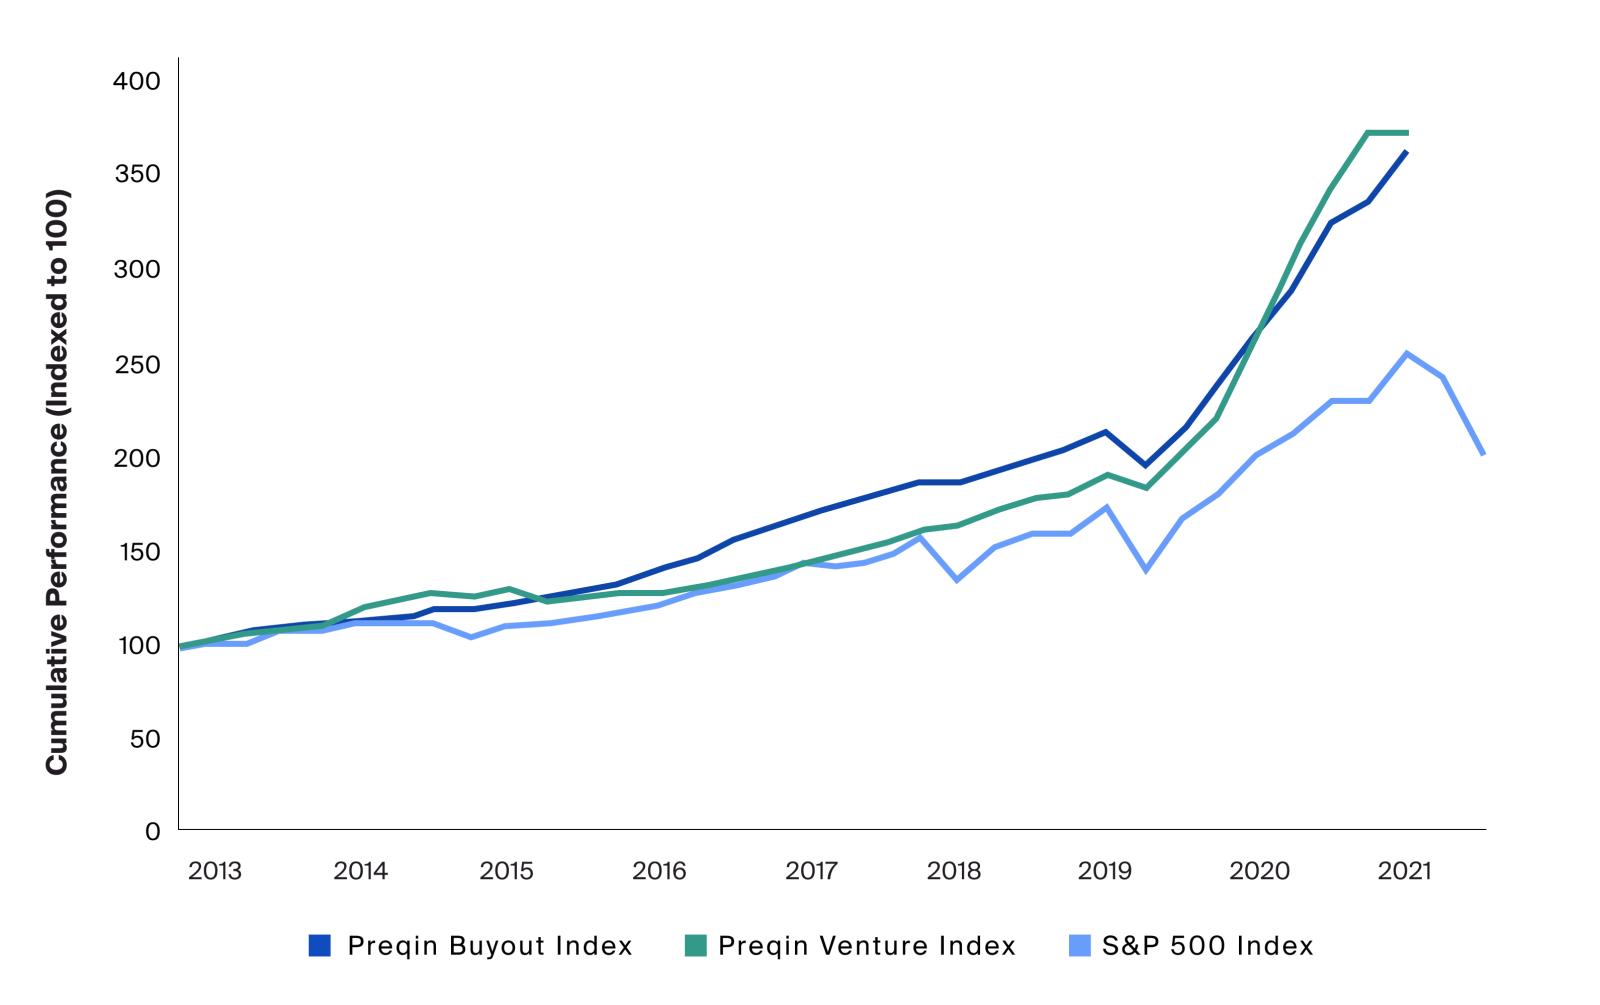 Broad outperformance of buyout, venture capital funds over the S&P 500 over the past decade has been followed by a recent downturn